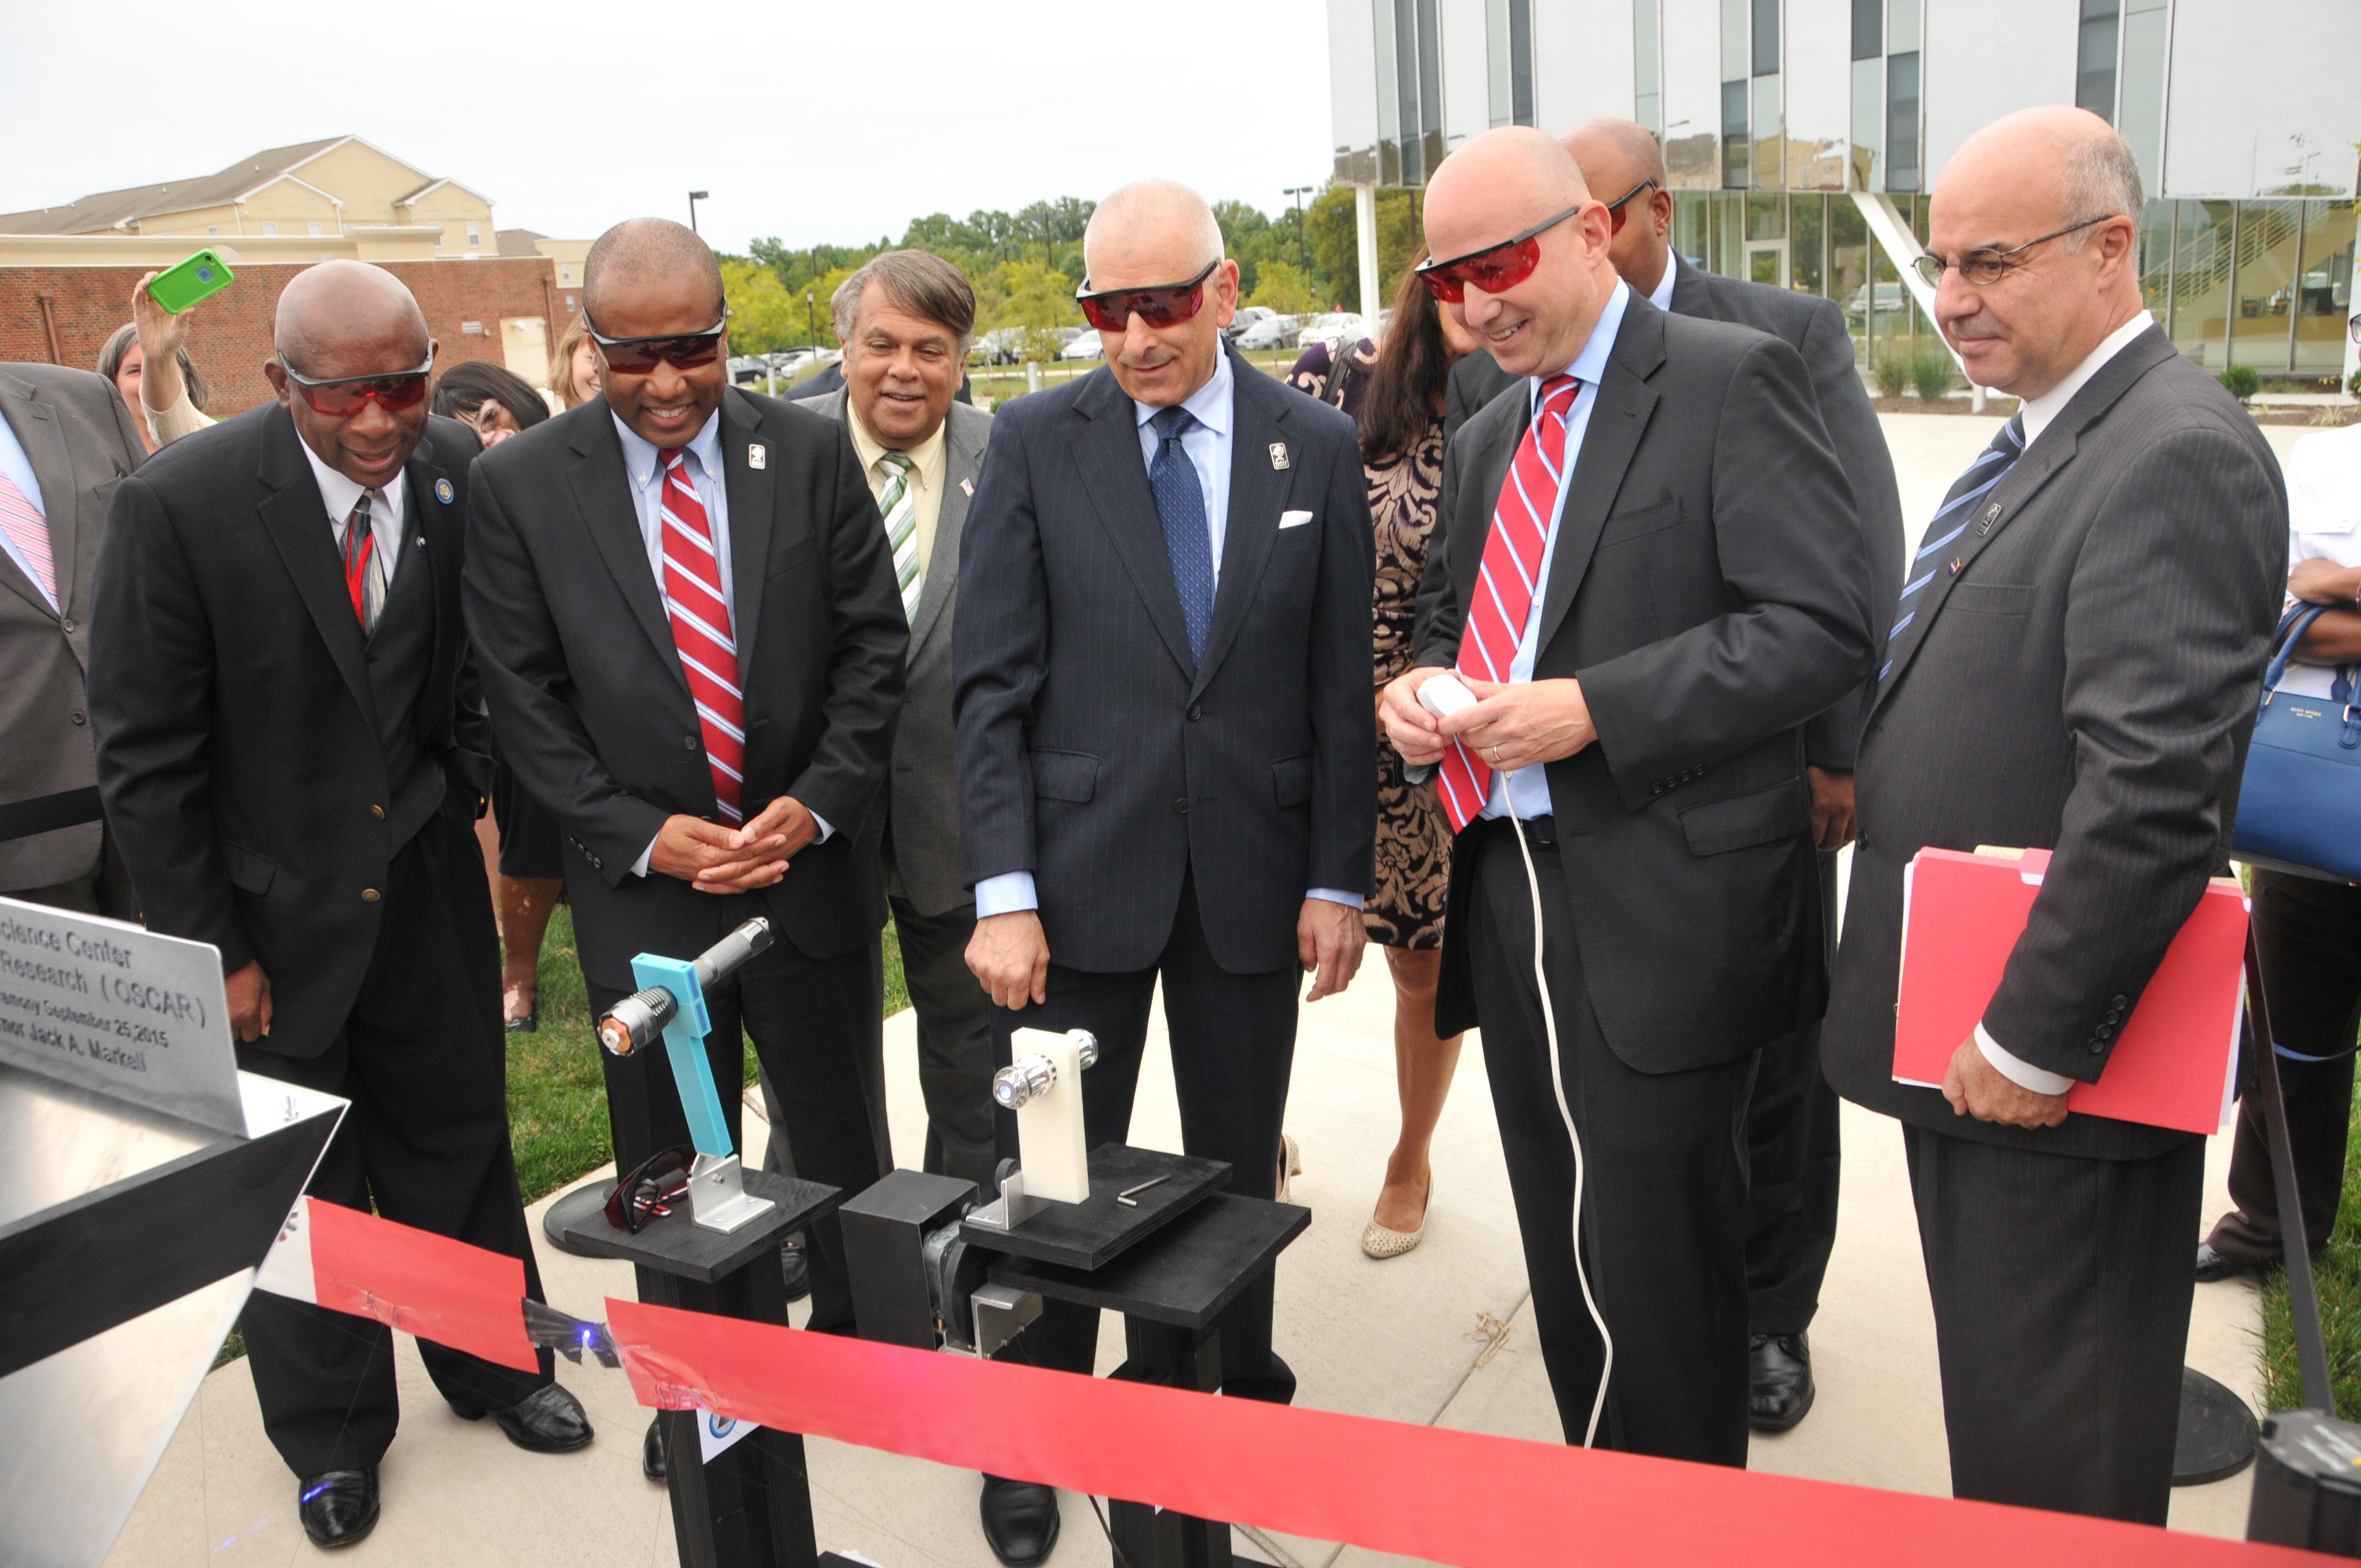  Governor Jack Markell (second from right) cuts the ceremonial ribbon using a laser. (Photo courtesy of Delaware State University) 